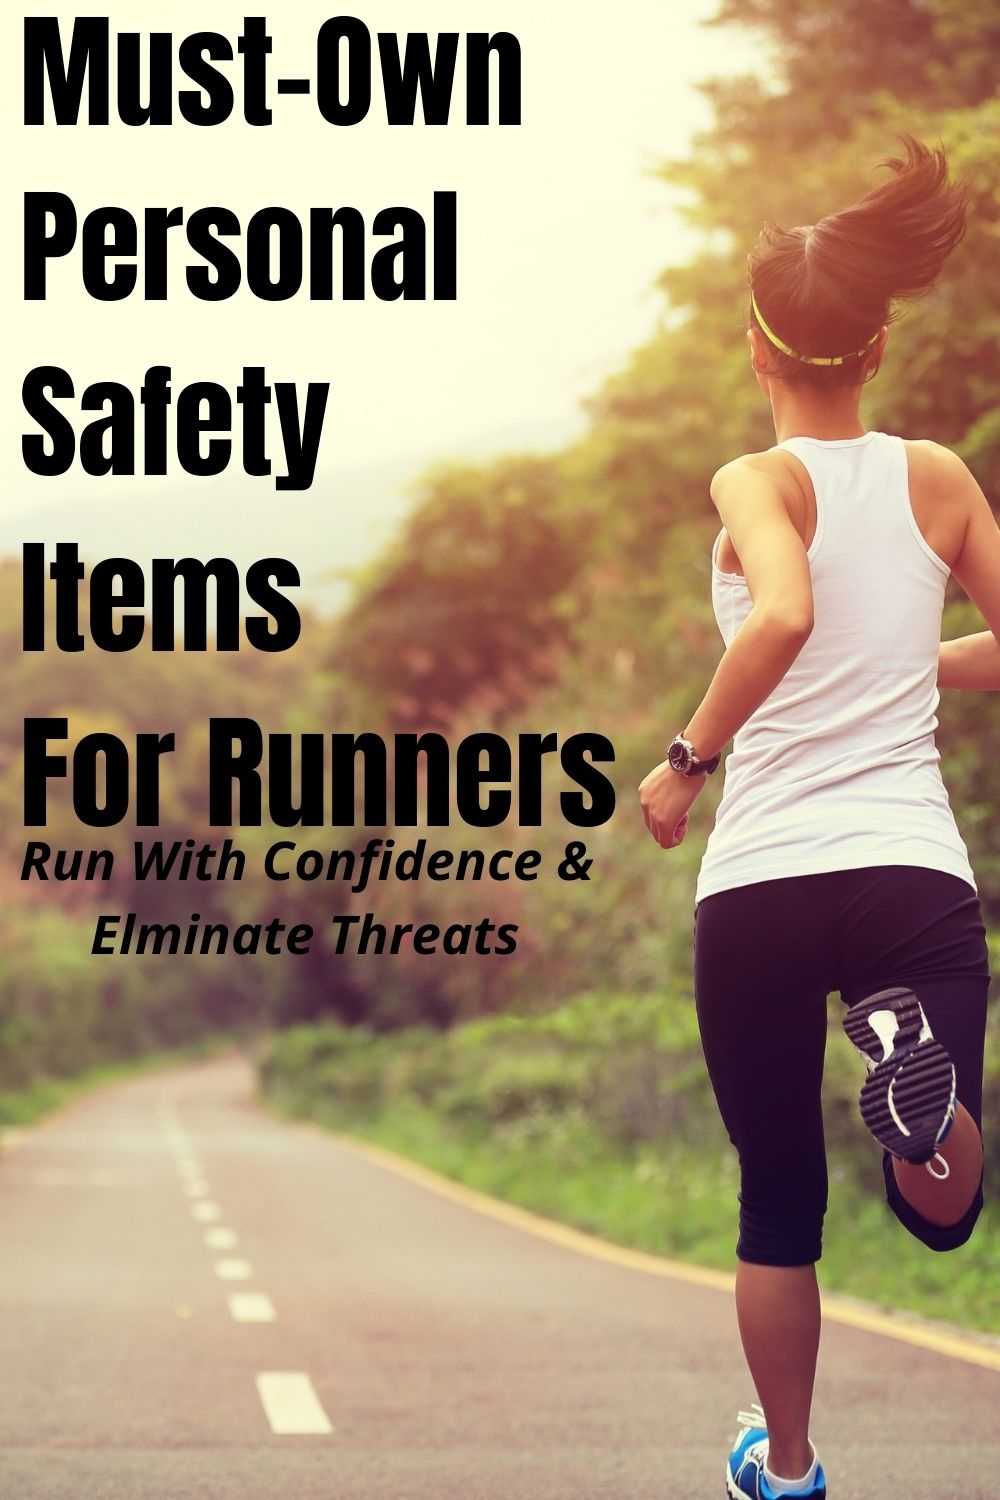 5 Accessories Every Enthusiastic Runner Needs